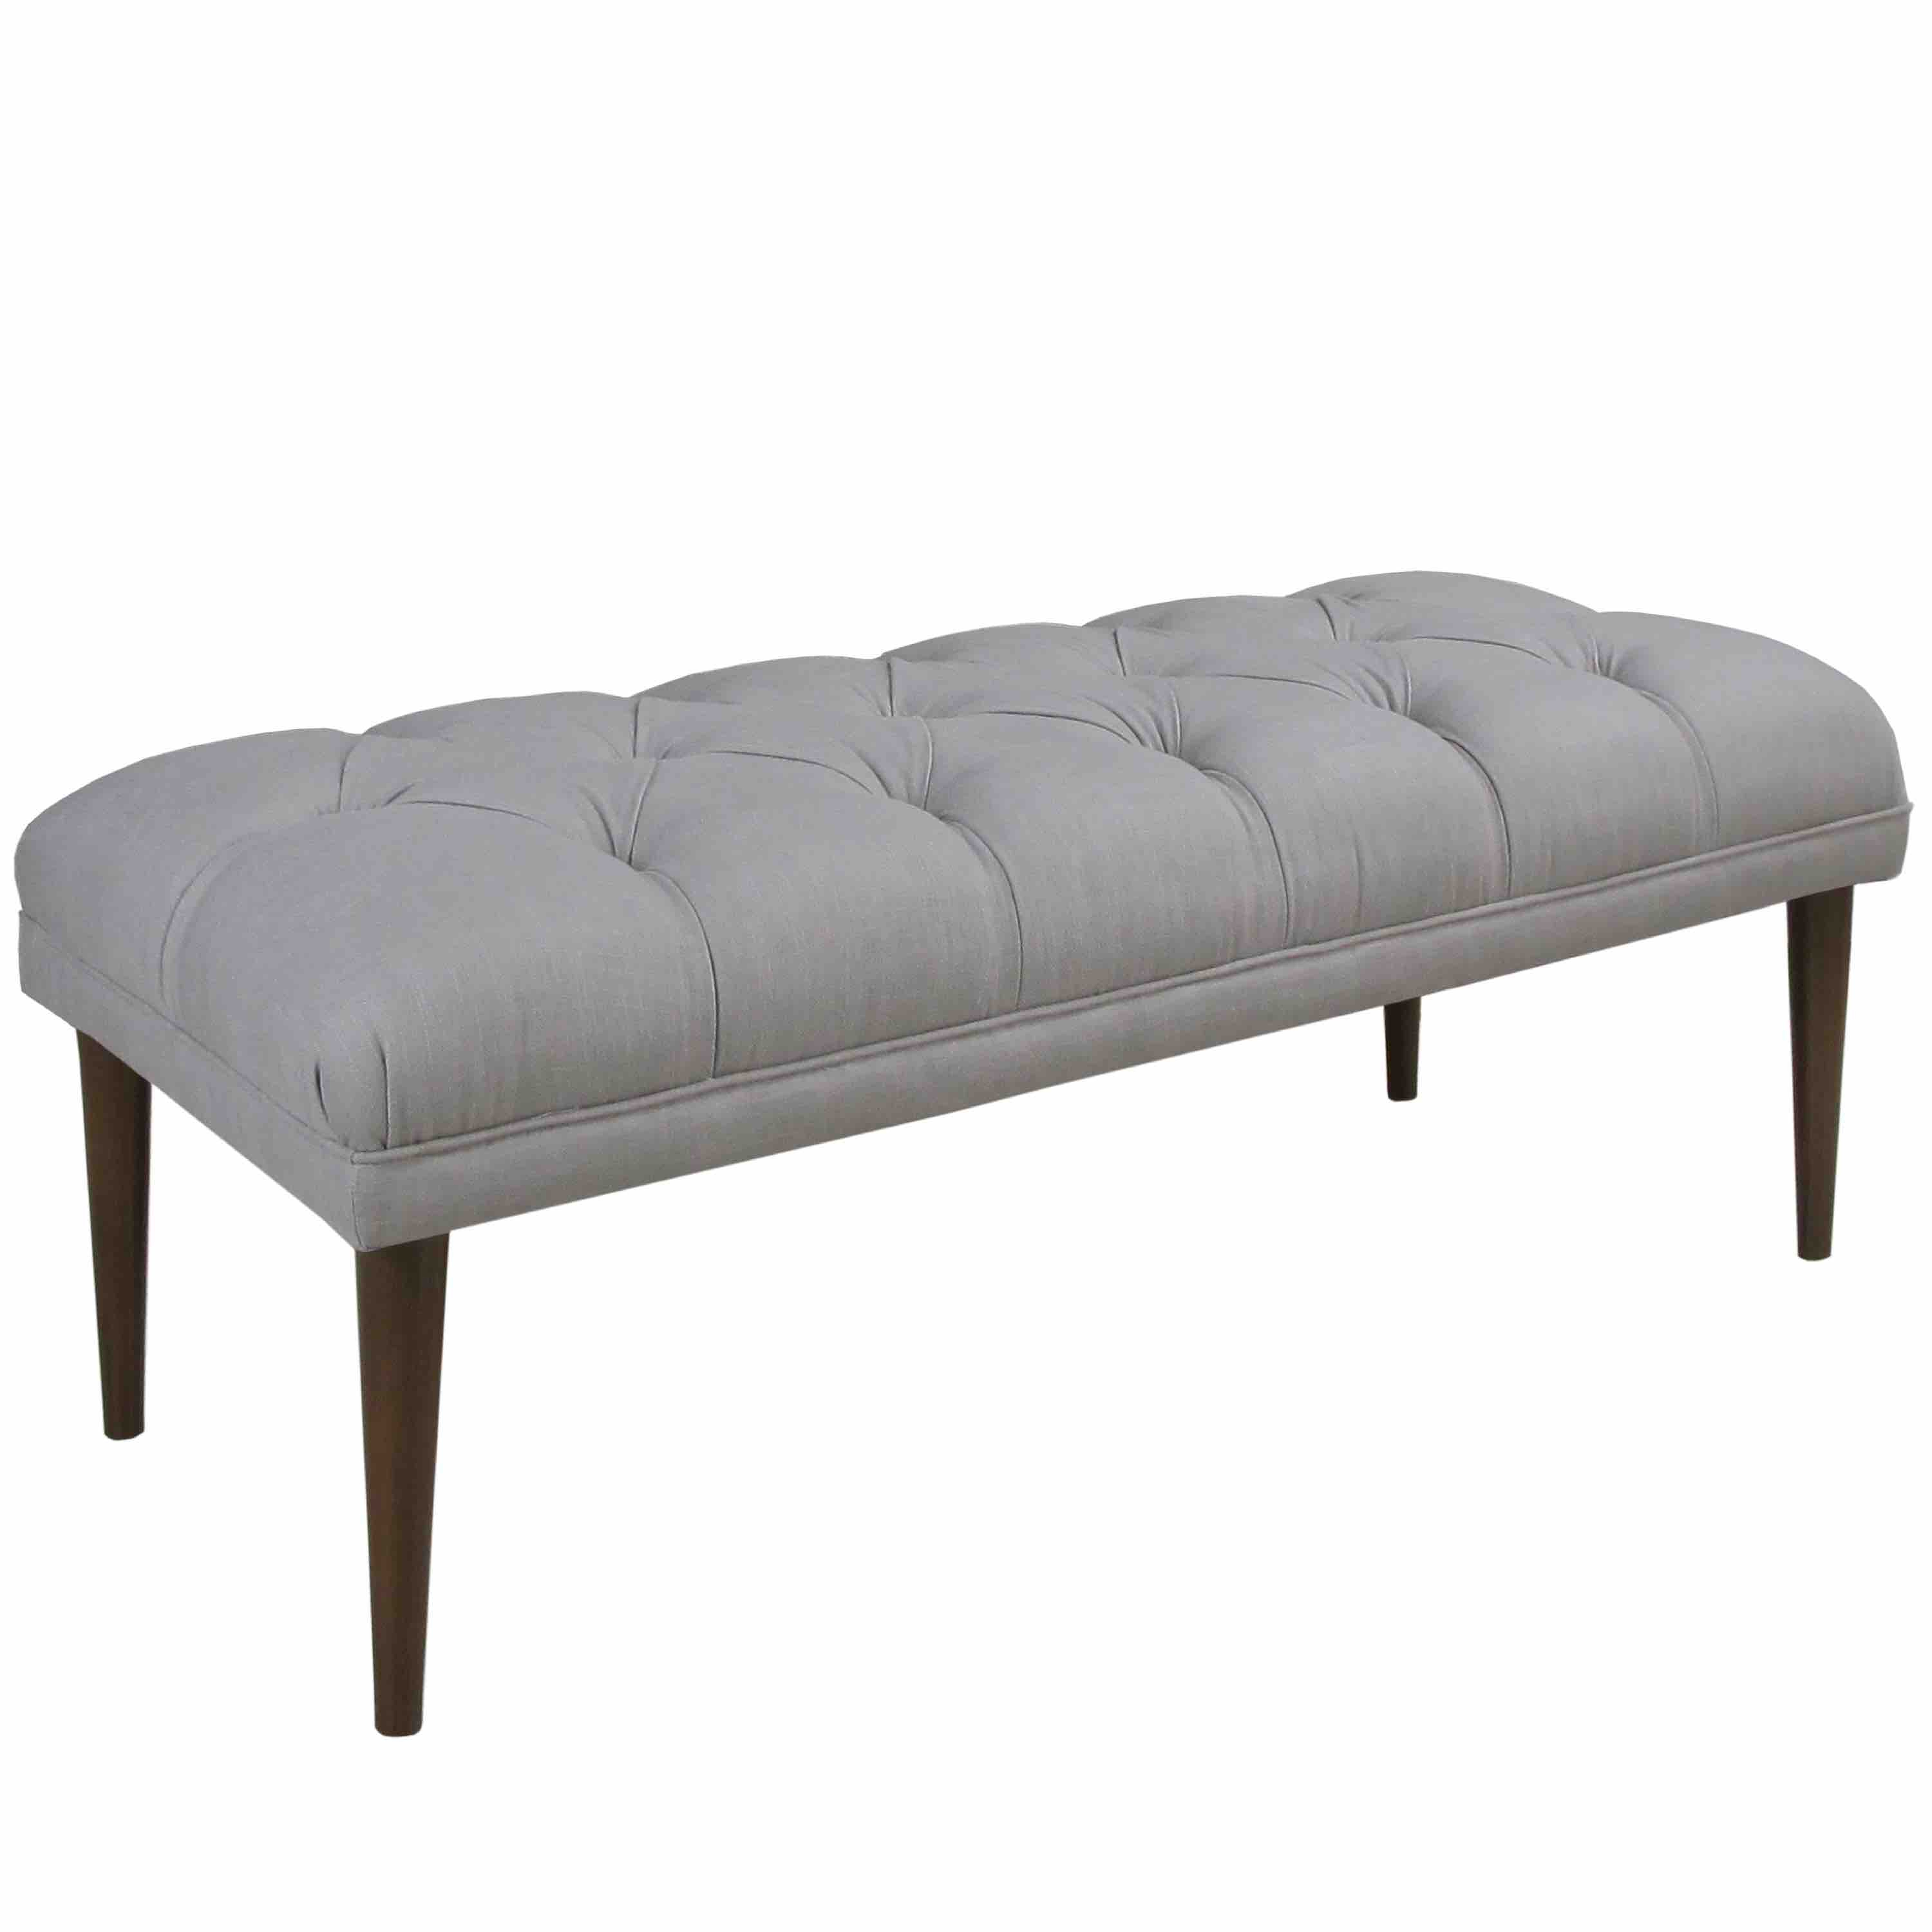 Tufted Bench with Cone Legs in Linen Grey - Third & Vine